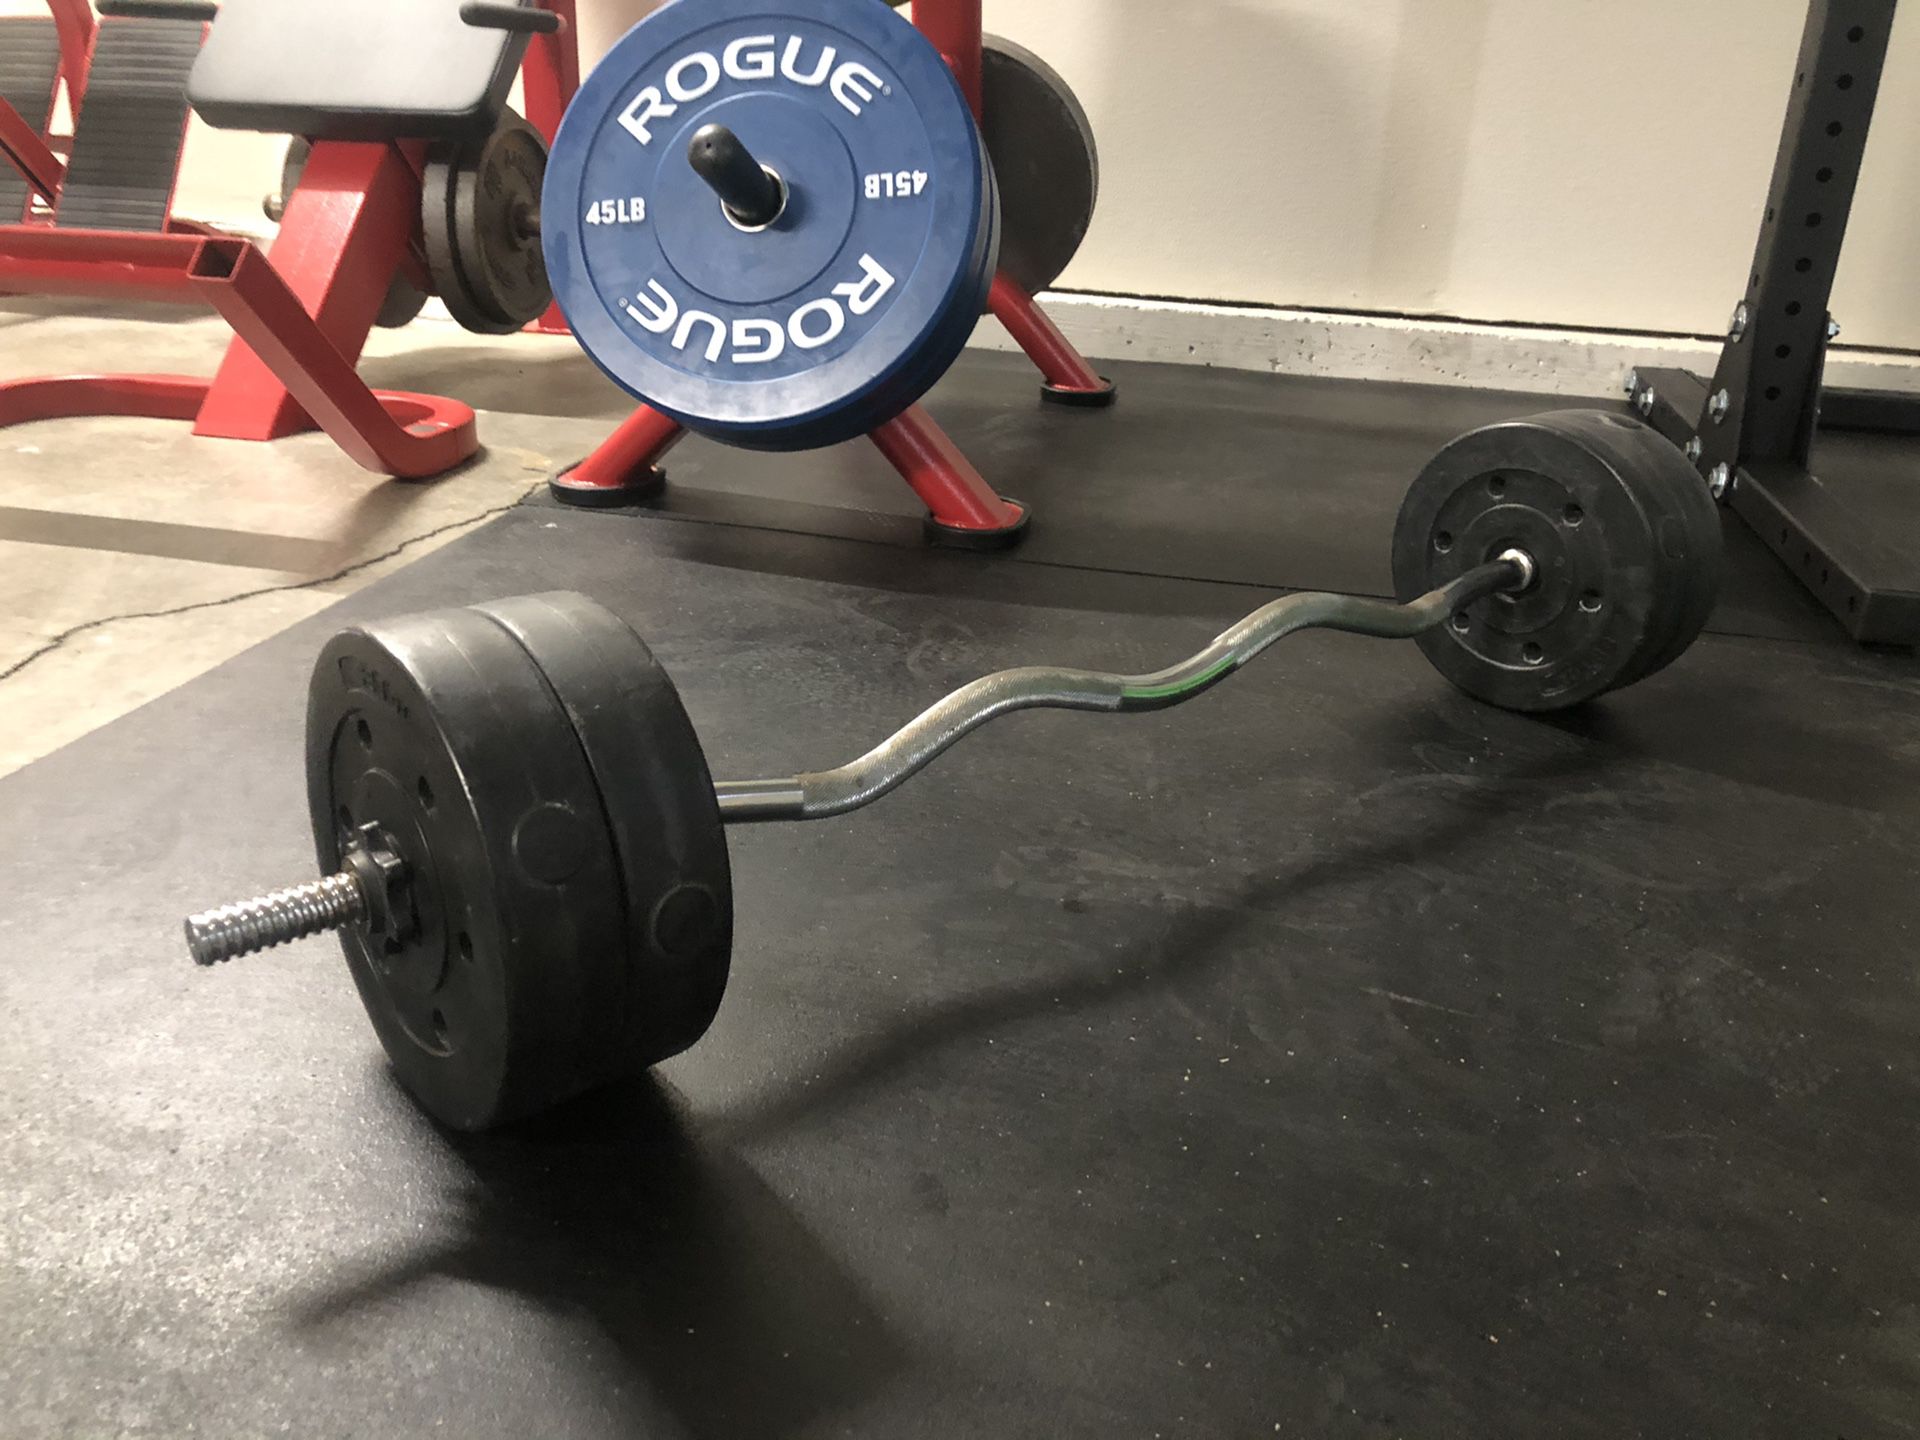 Curl bar, 1”, 40lbs included